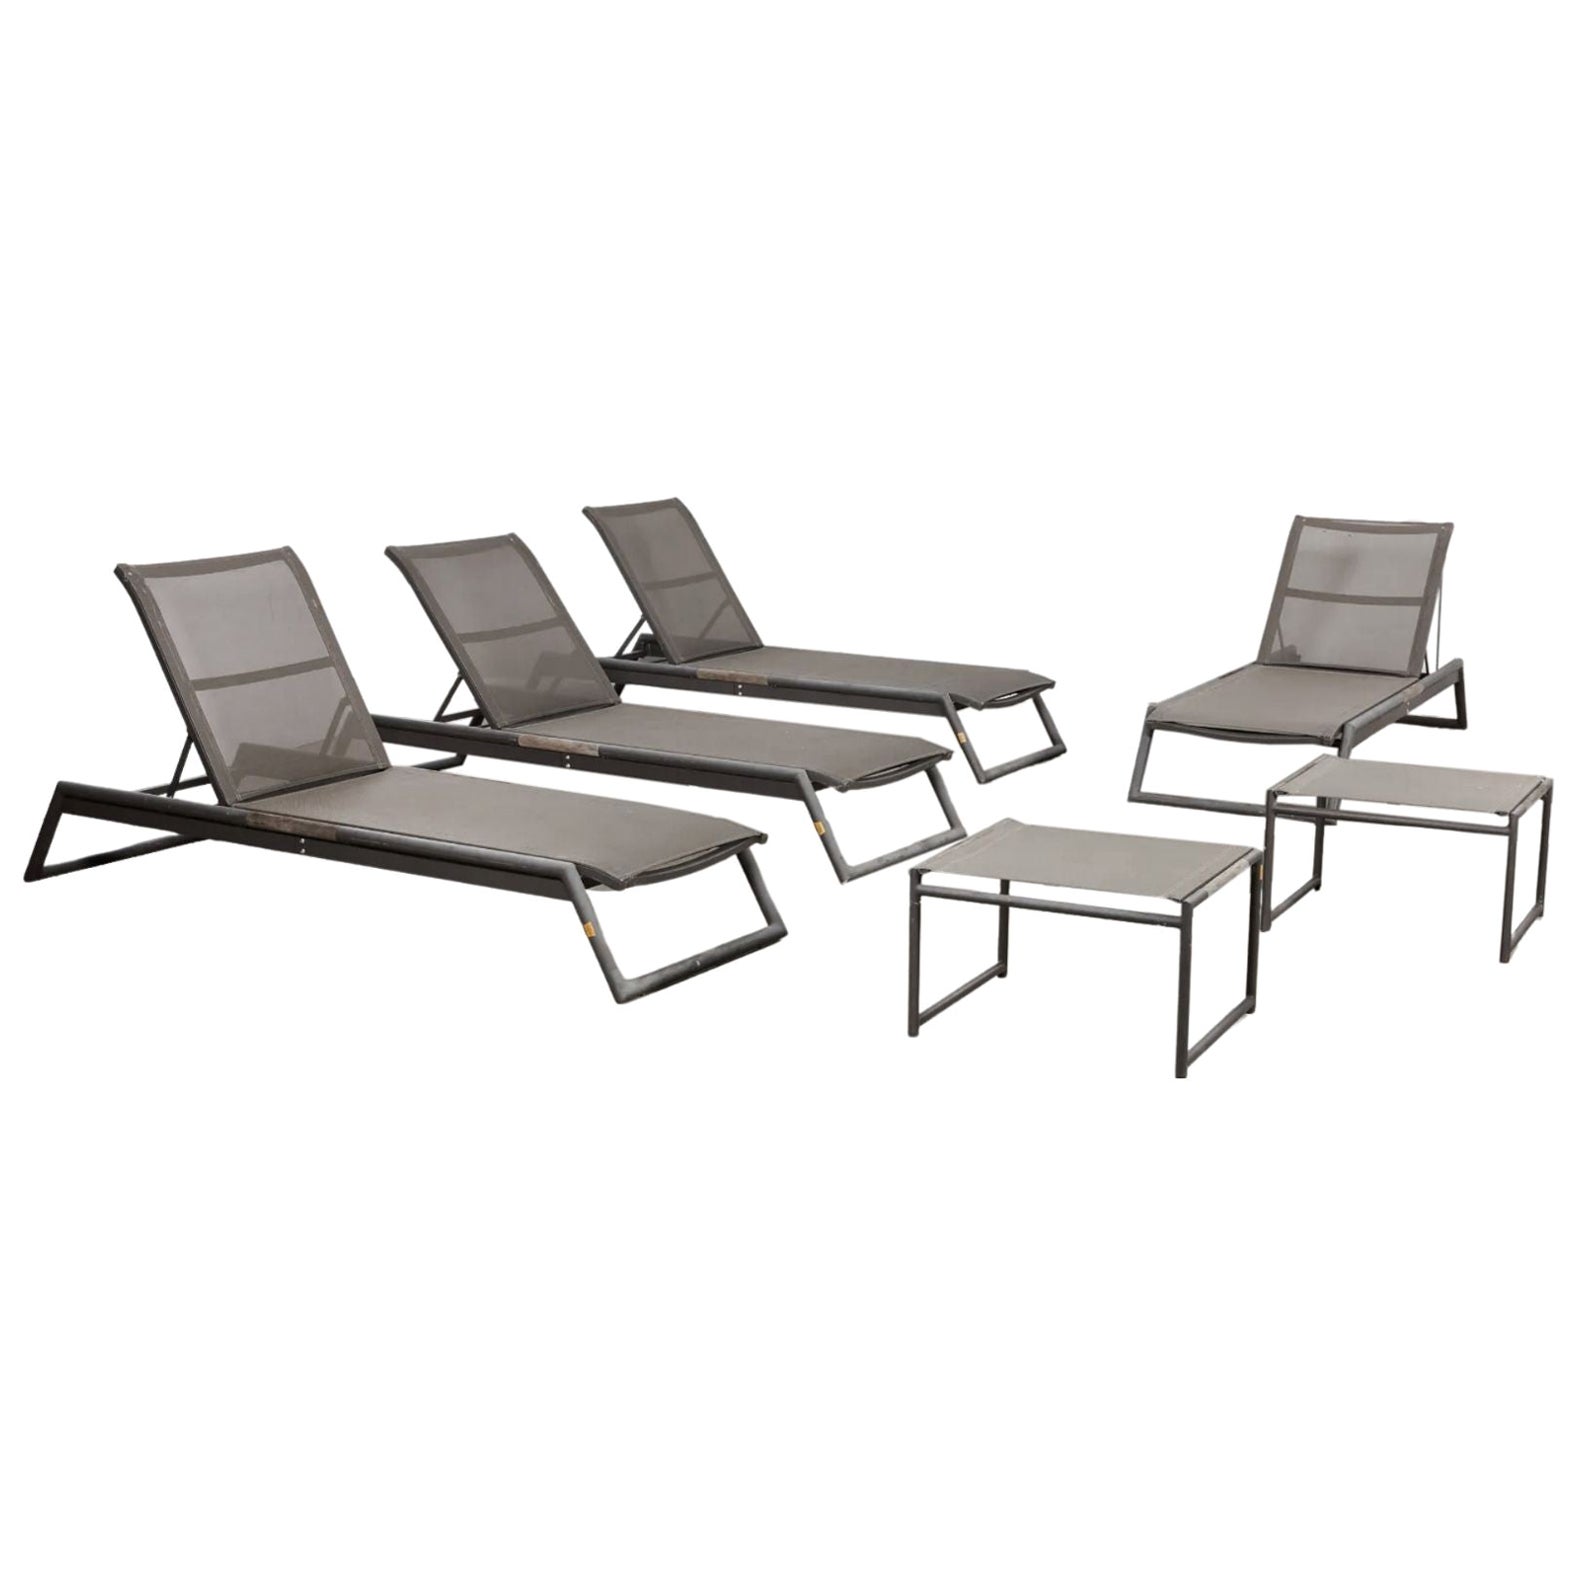 Harbour Outdoor Contemporary Sling-Fabric Adjustable Chaise Lounge Outdoor Set